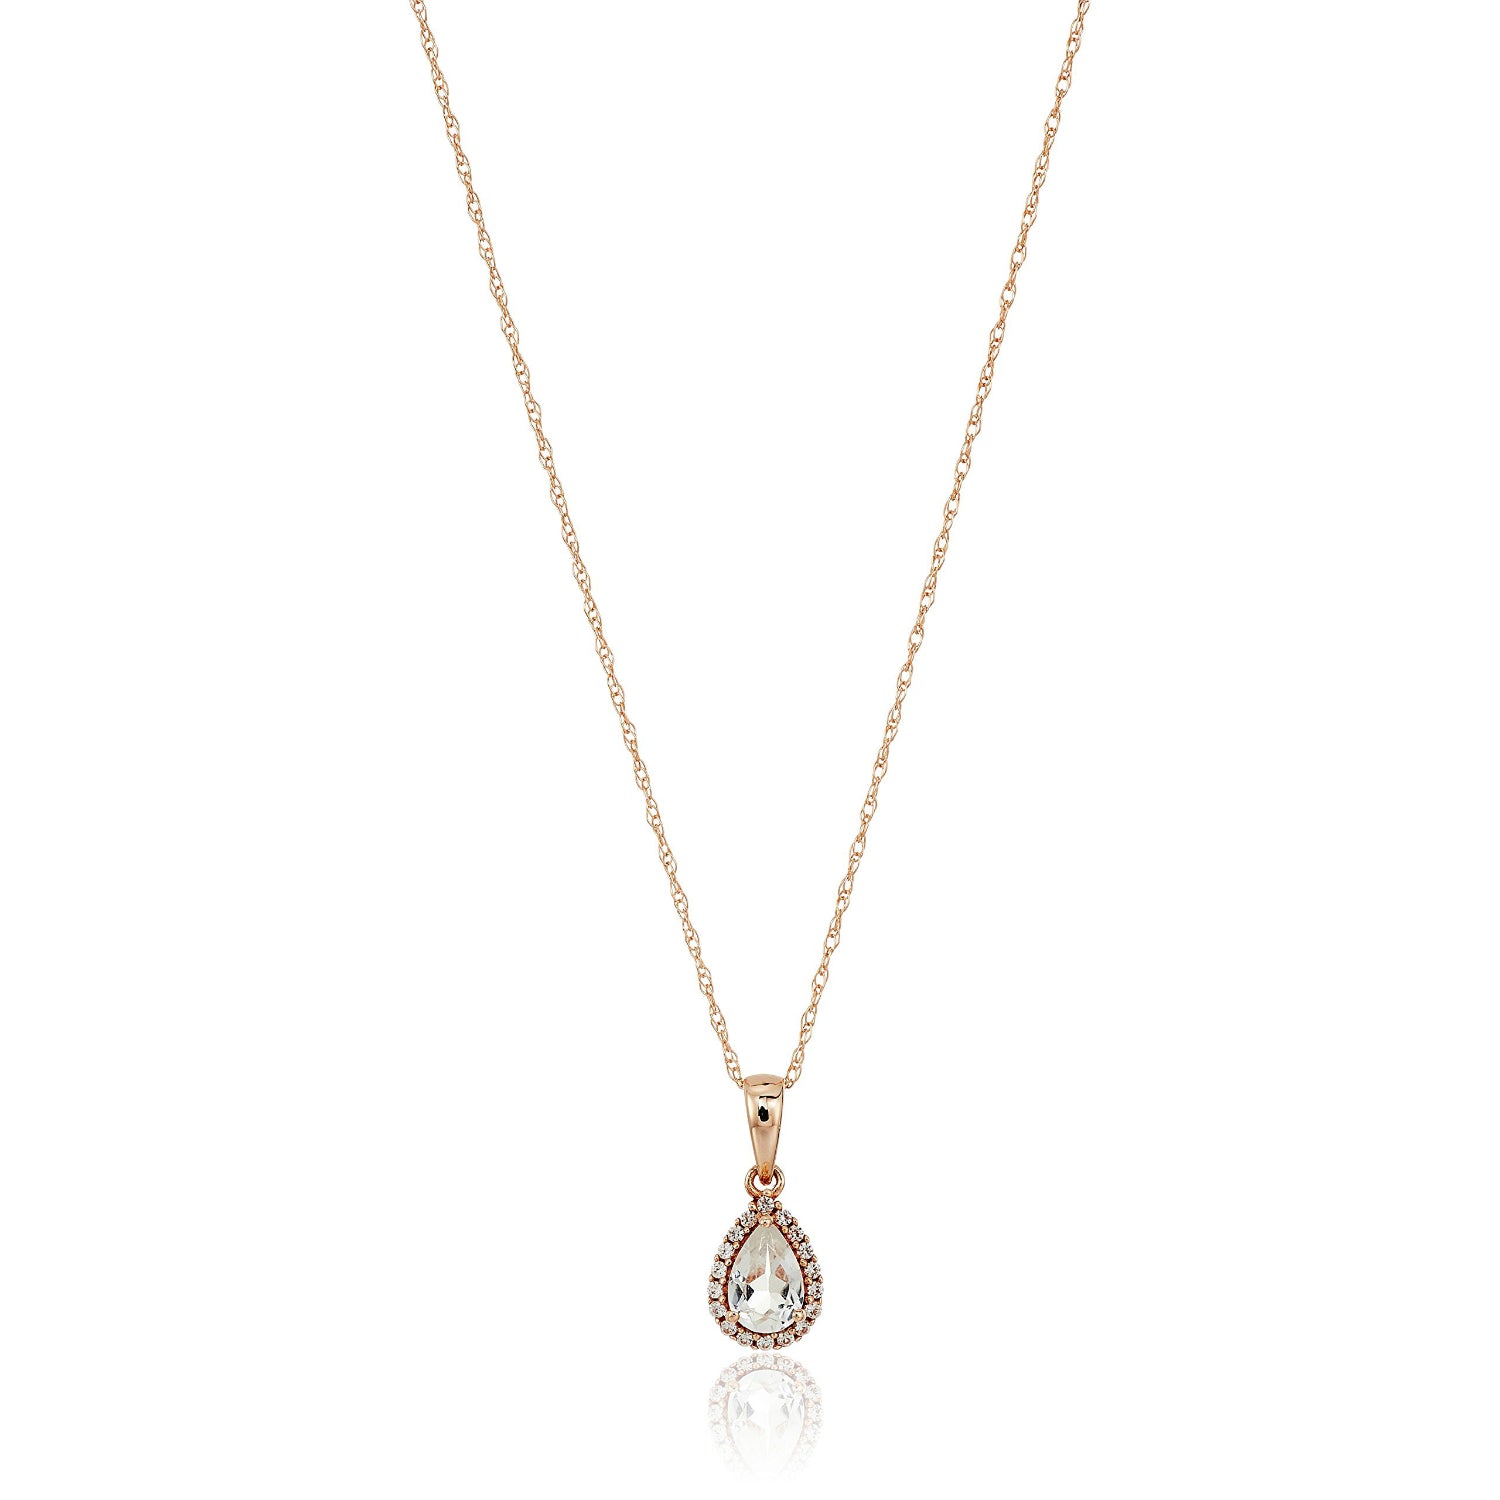 10k Rose Gold White TPZ & Created White Sapphire Pendant Necklace 18" - Pinctore